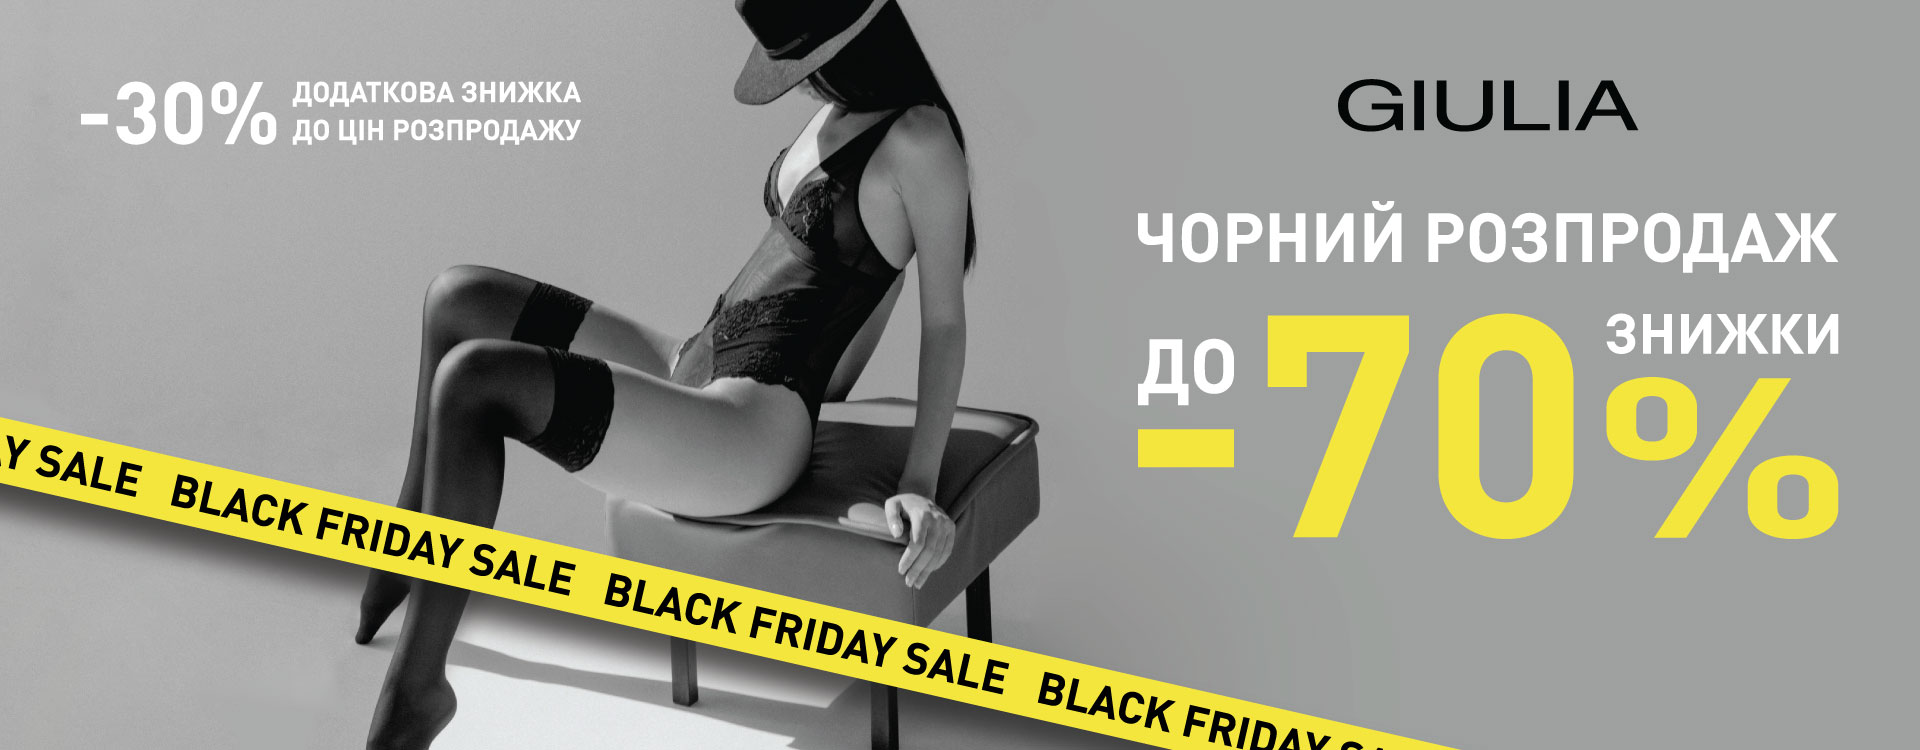 BLACK SALE IN GIULIA with discounts up to 70%